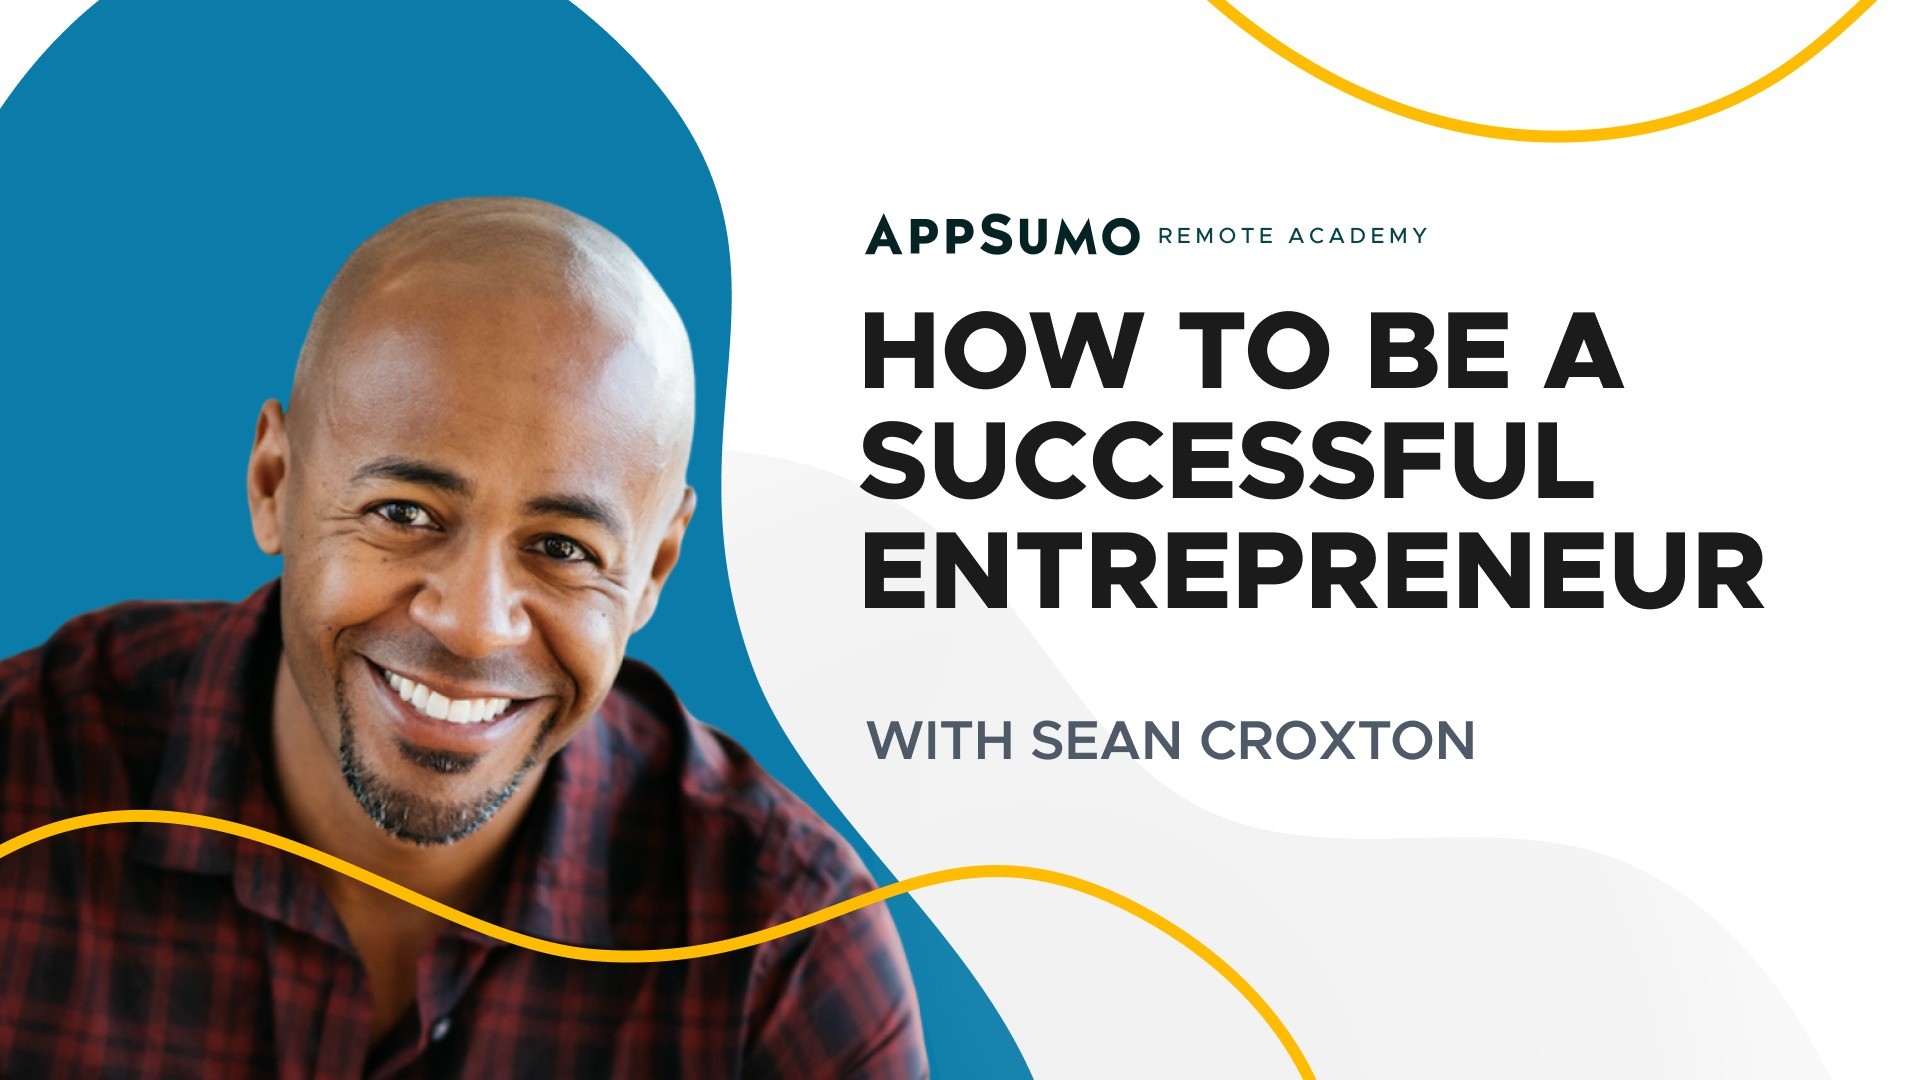 AppSumo Deal for Remote Work Academy: How to be a Successful Entrepreneur - Plus exclusive